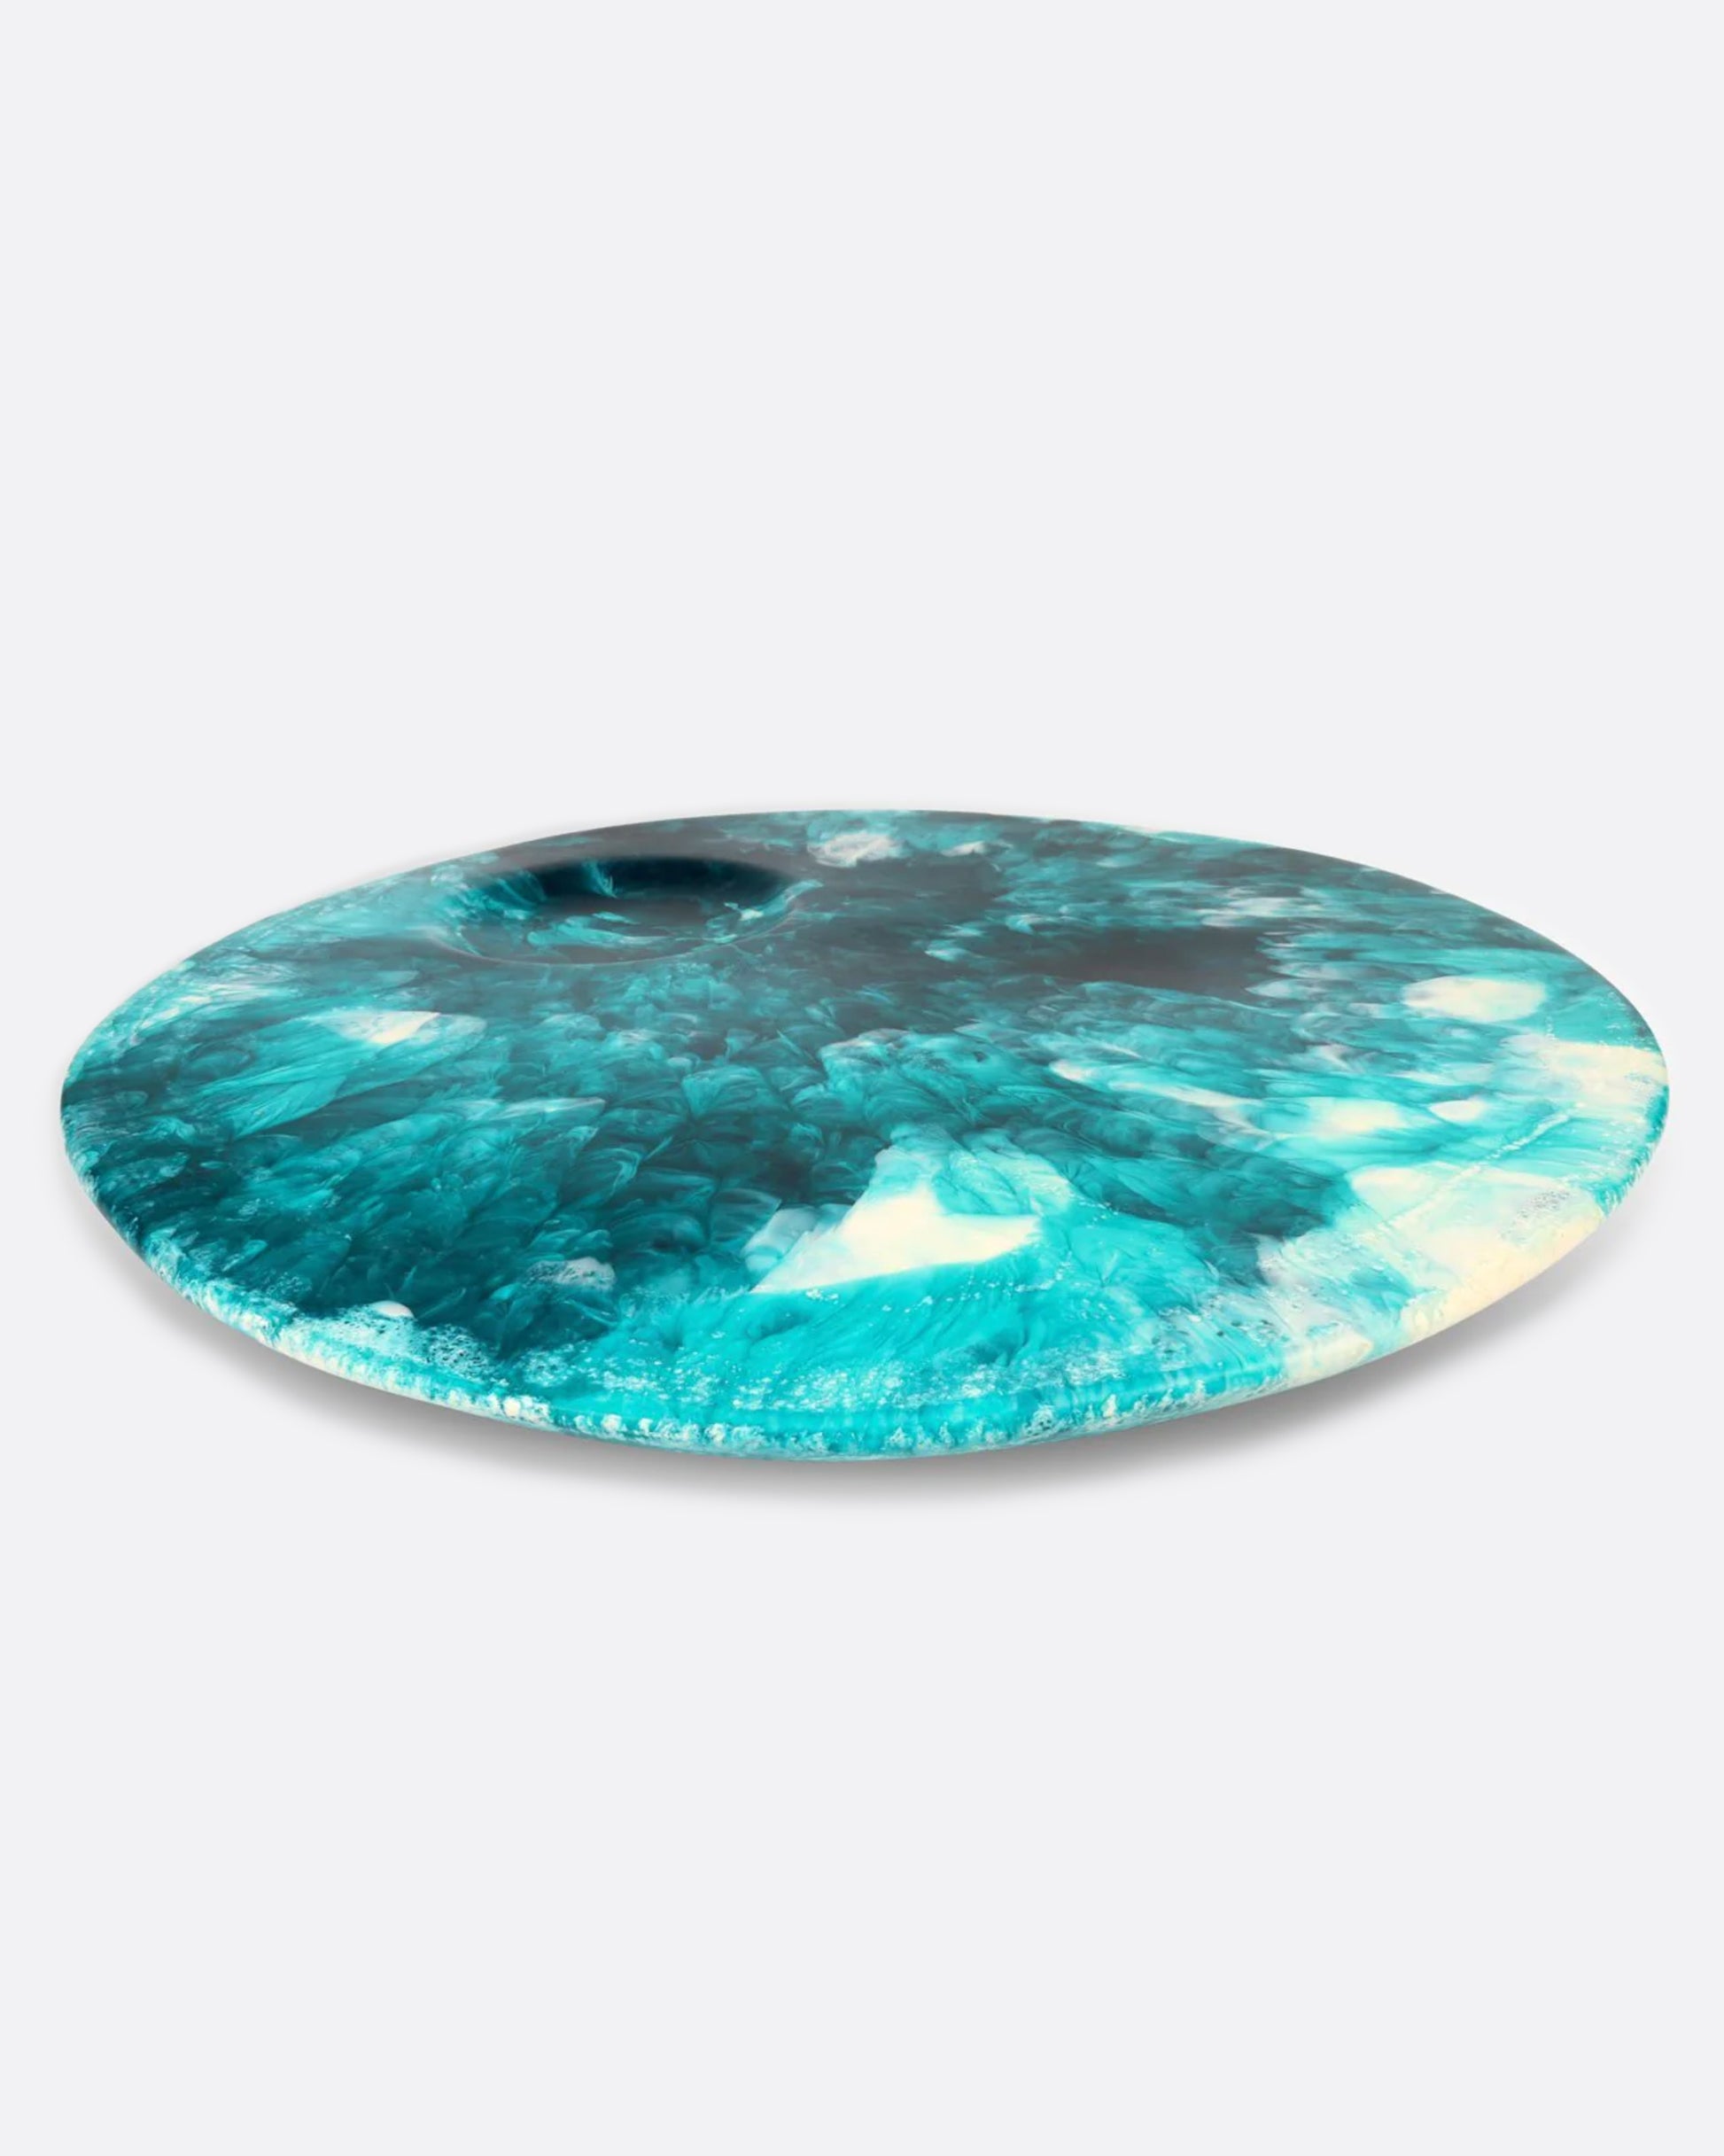 A round teal blue and white resin platter with a round indentation, shown from the side.